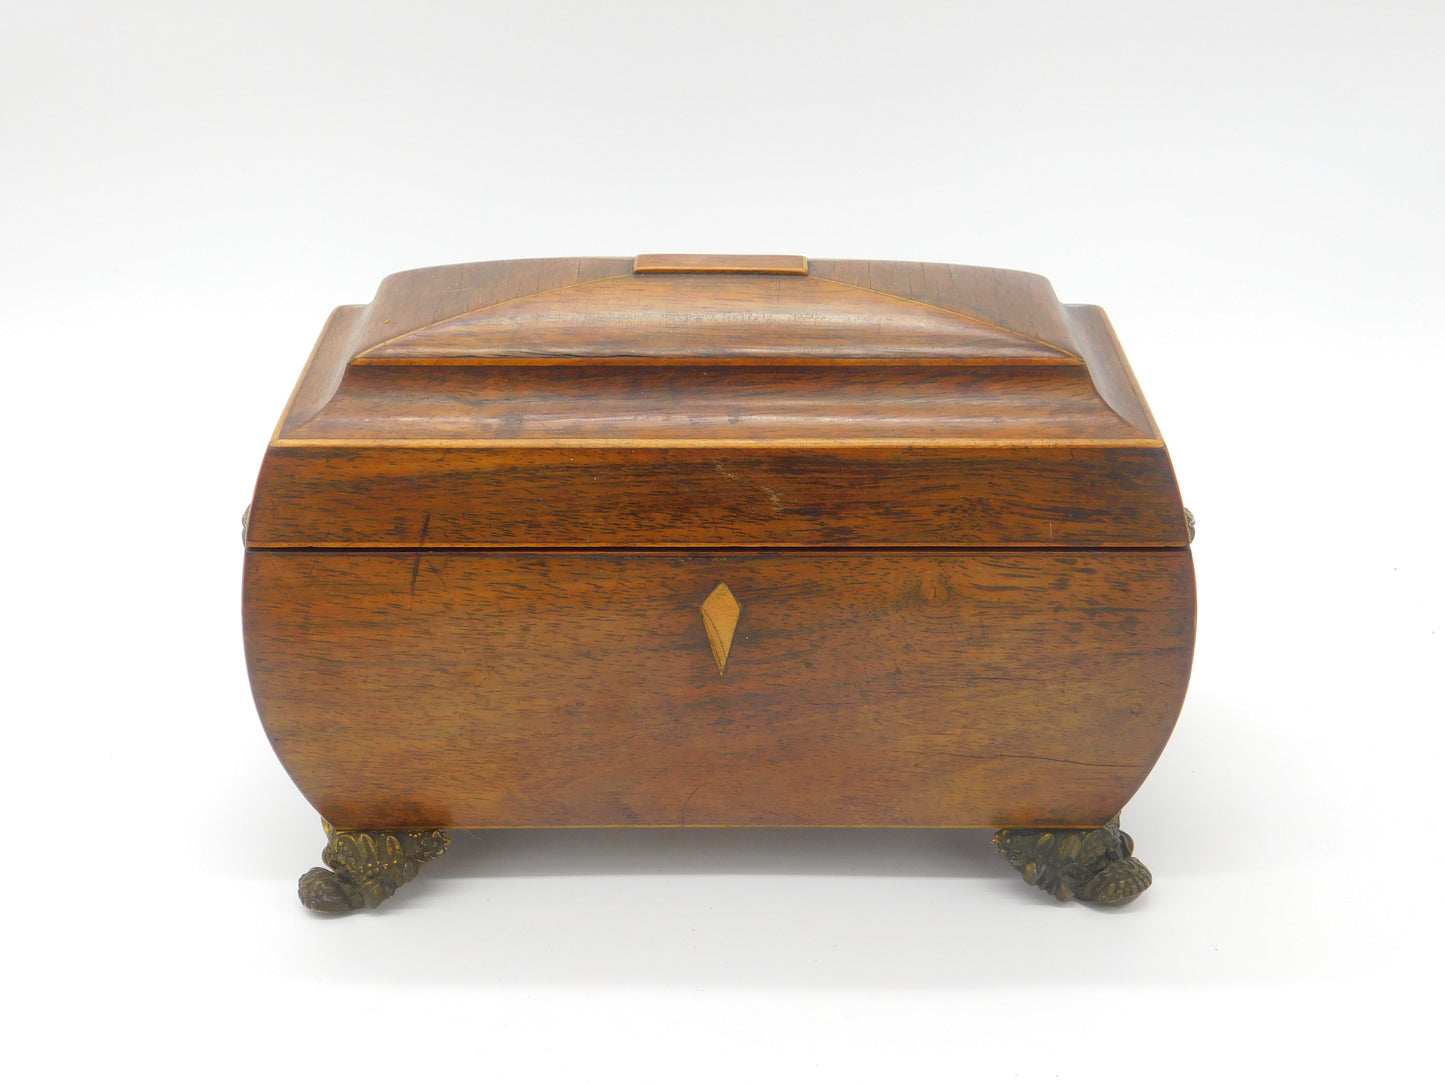 Regency Mahogany Tea Caddy with Ornate Brass Fittings & Interior c1830 Antique